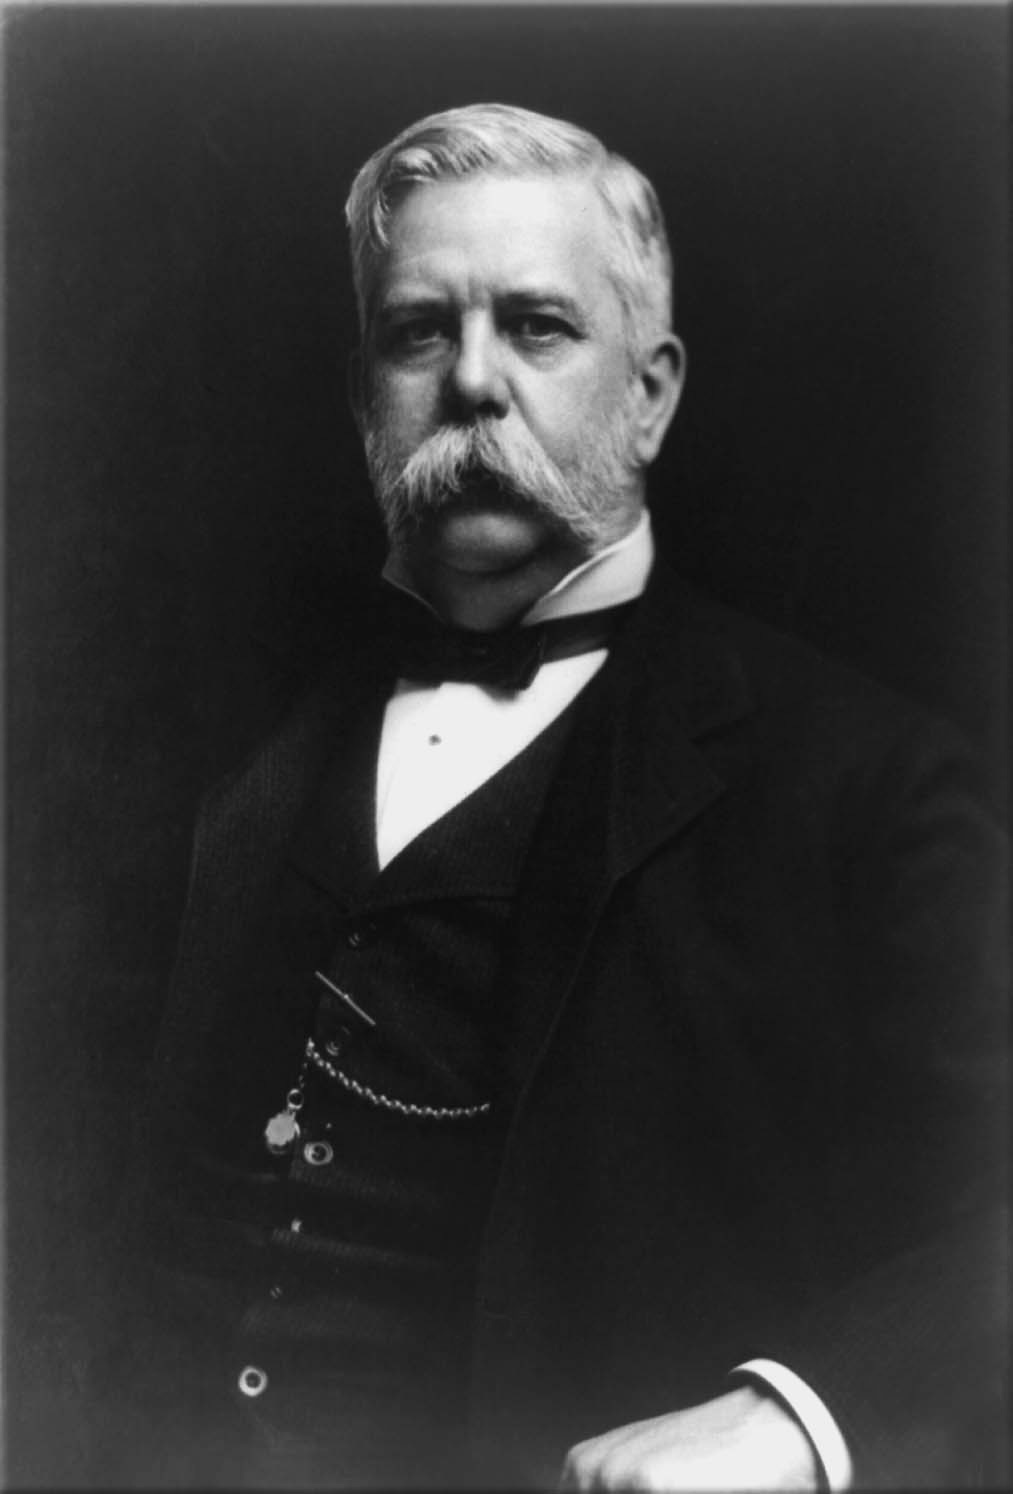 George Westinghouse, Jr (October 6, 1846 – March 12, 1914) was an American entrepreneur and engineer who invented the railway air brake and was a pioneer of the electrical industry